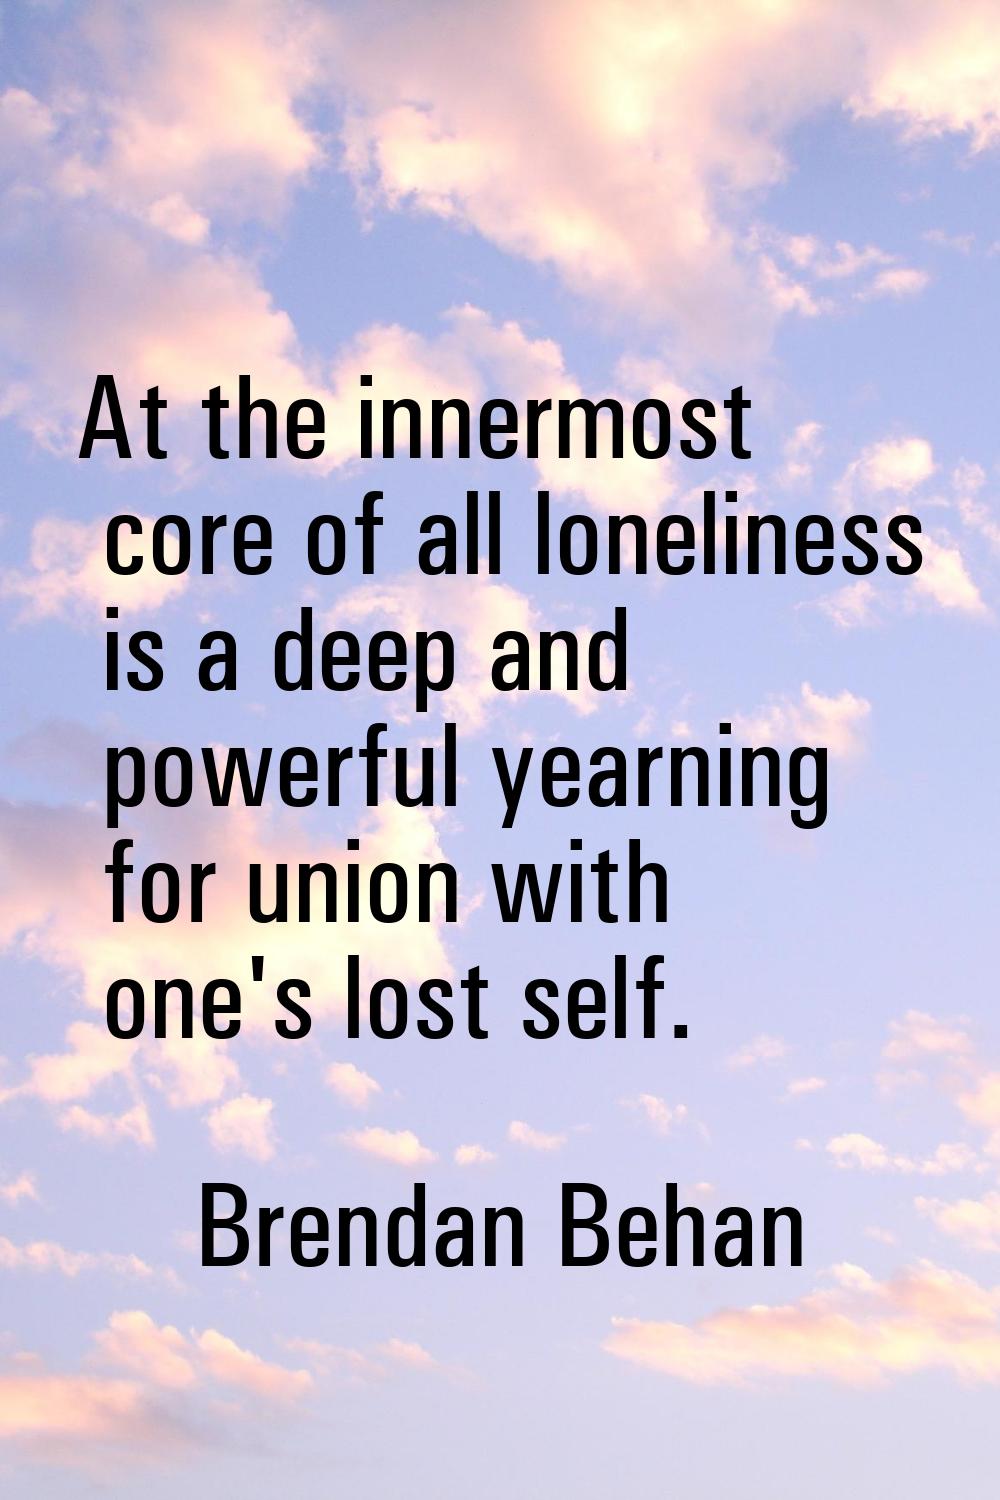 At the innermost core of all loneliness is a deep and powerful yearning for union with one's lost s